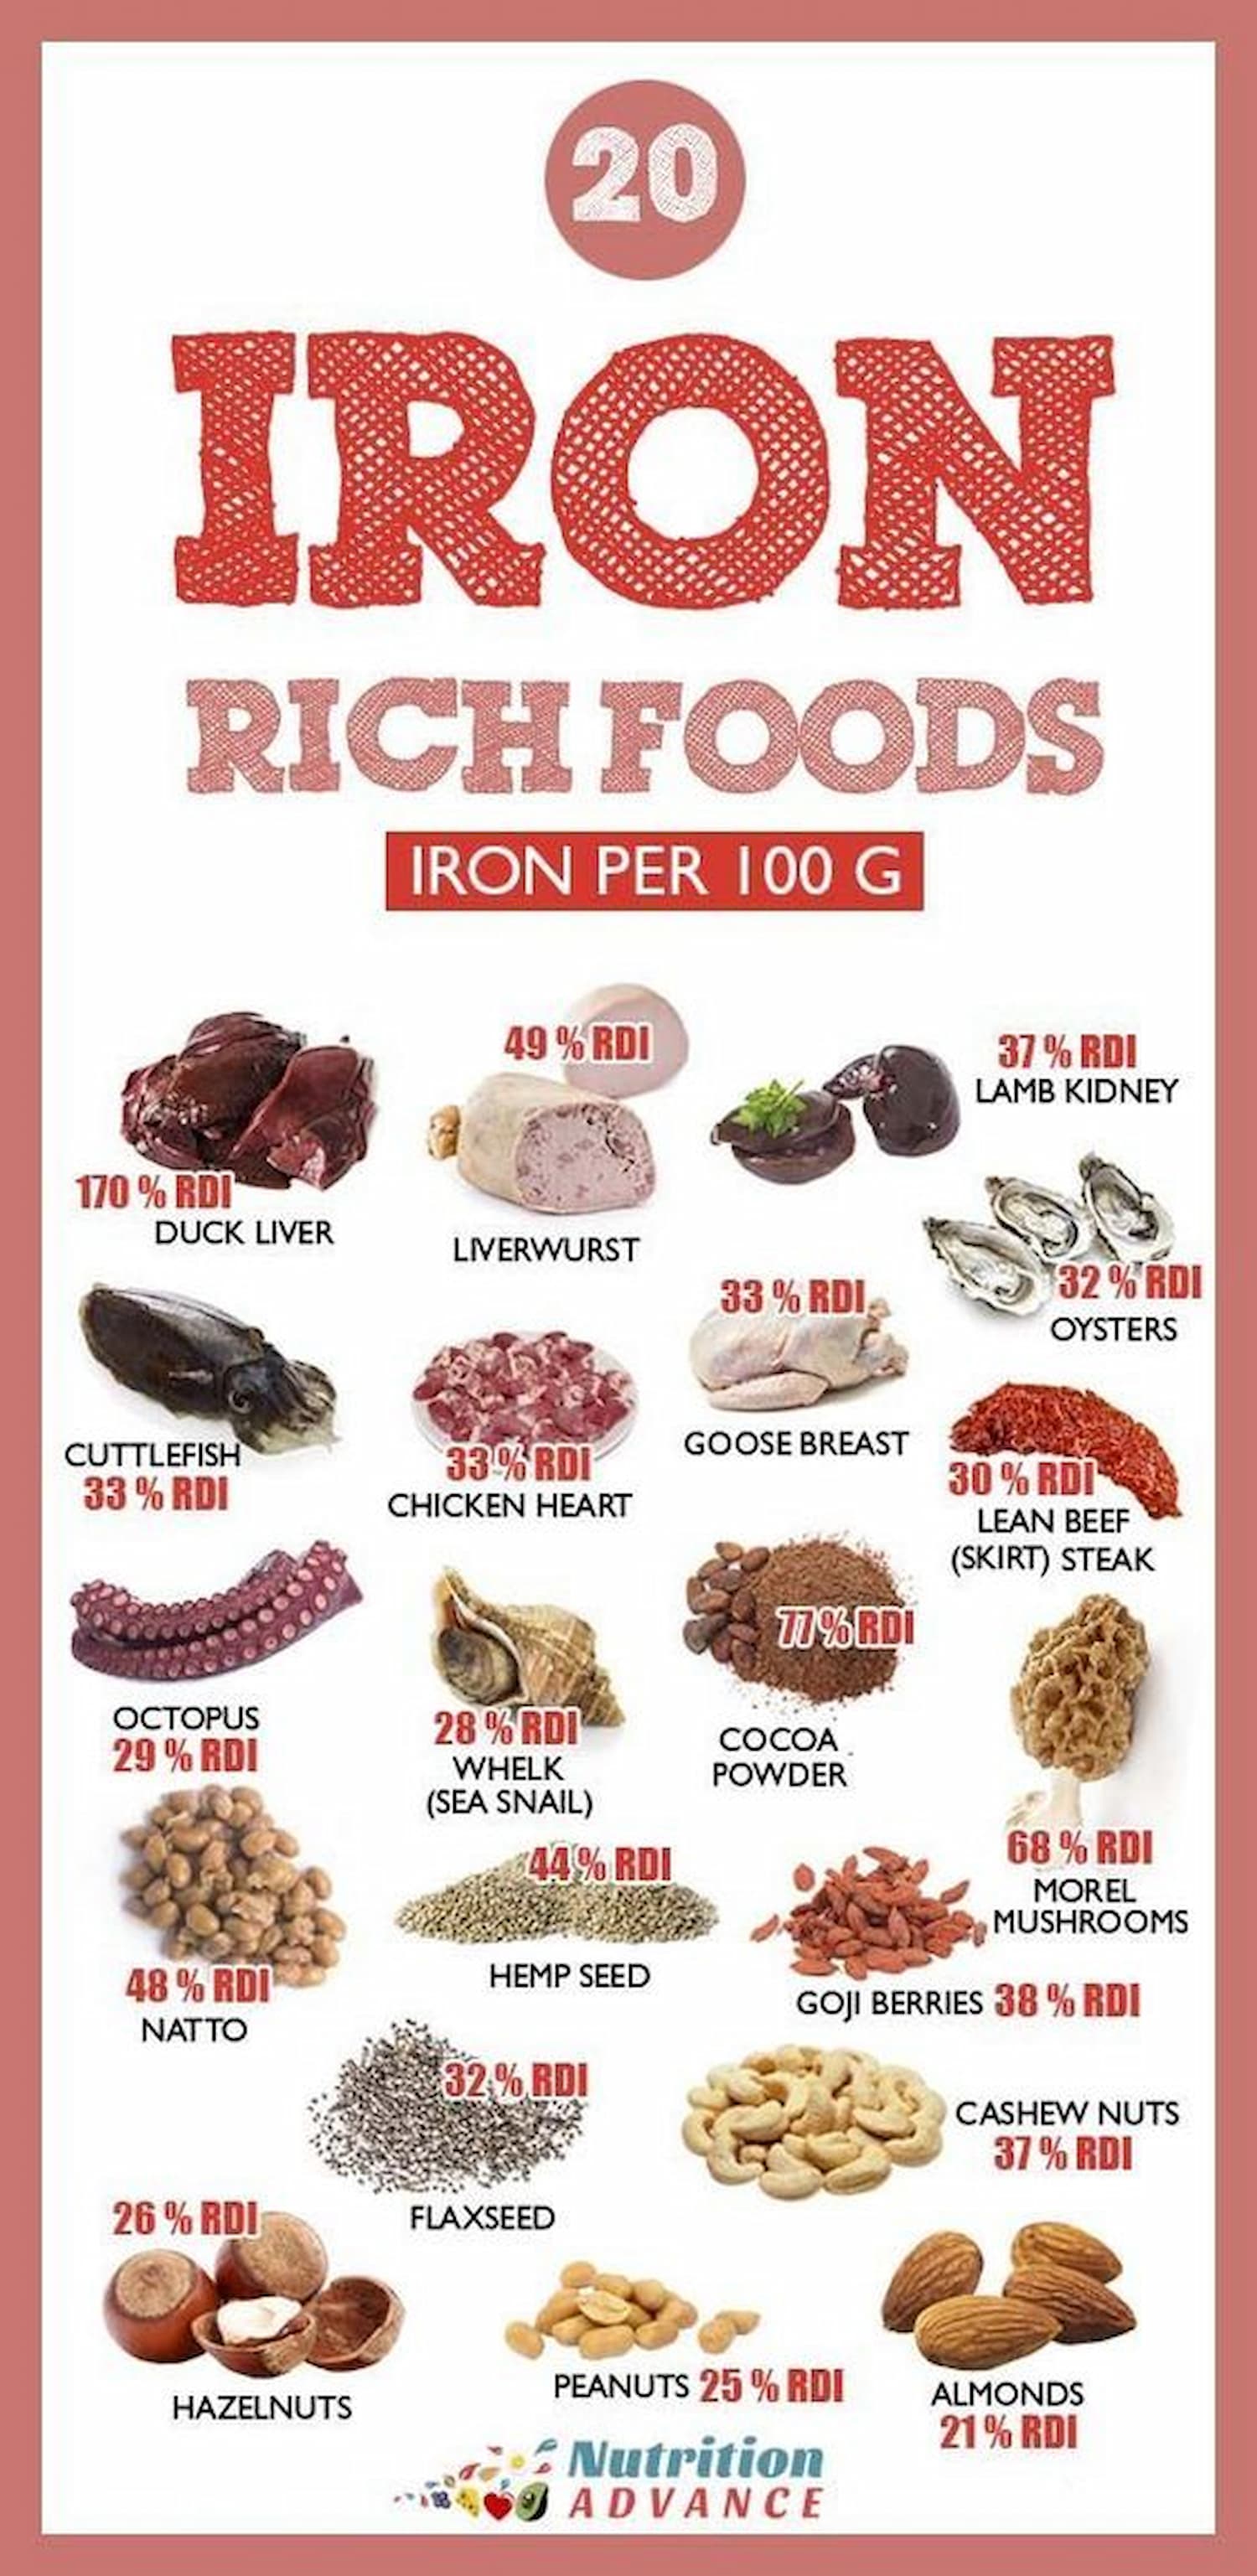 Foods rich in iron content that can help people with anaemia